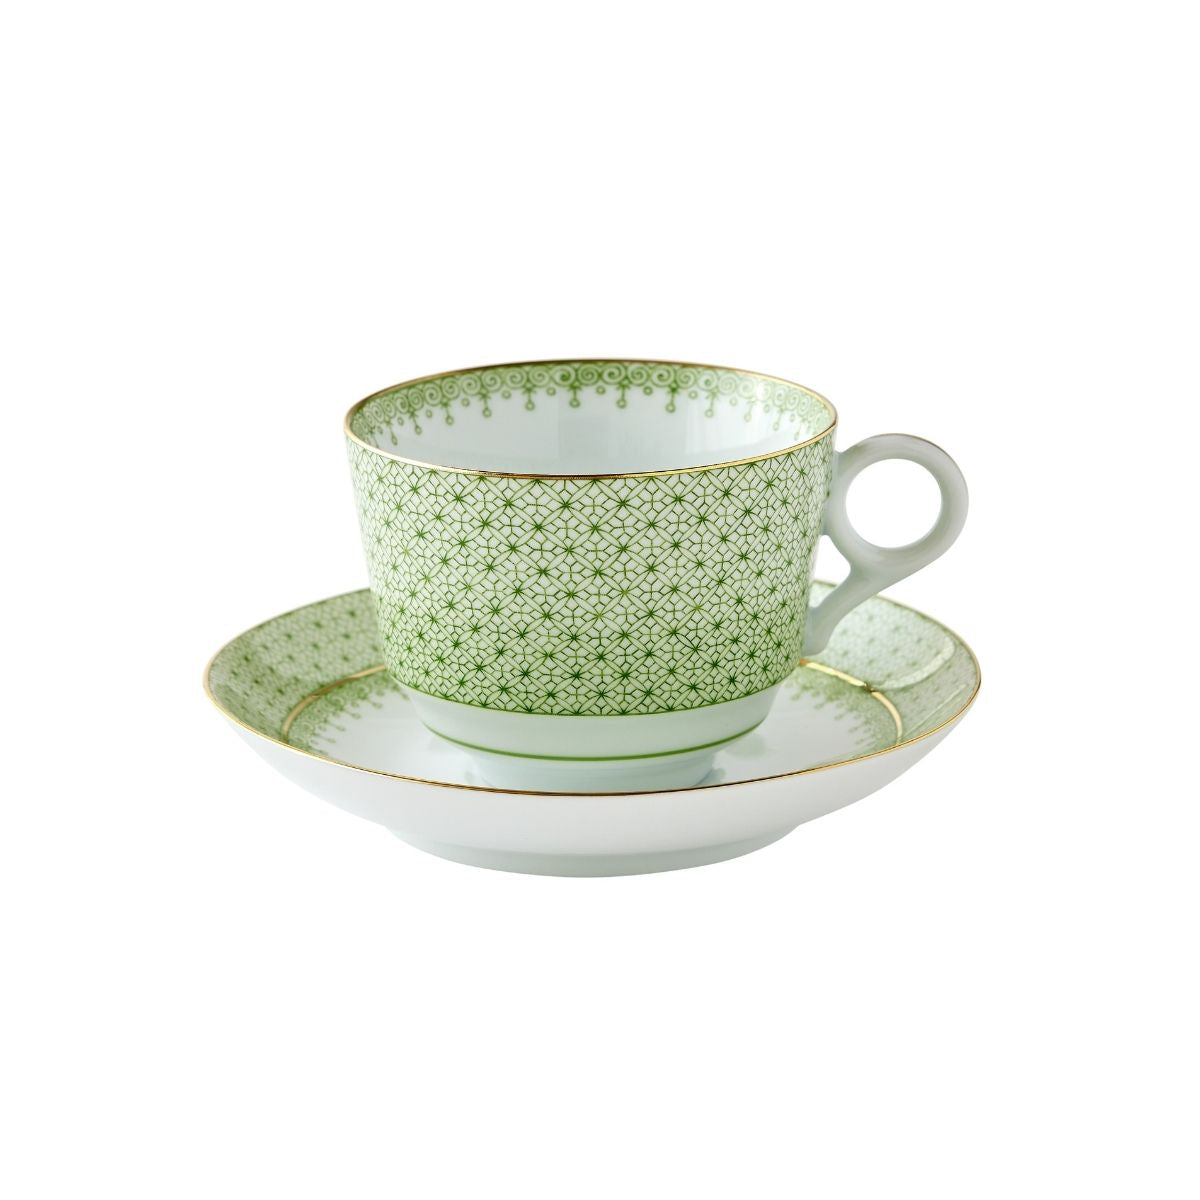 Tea Green Lace 5 Piece Place Setting